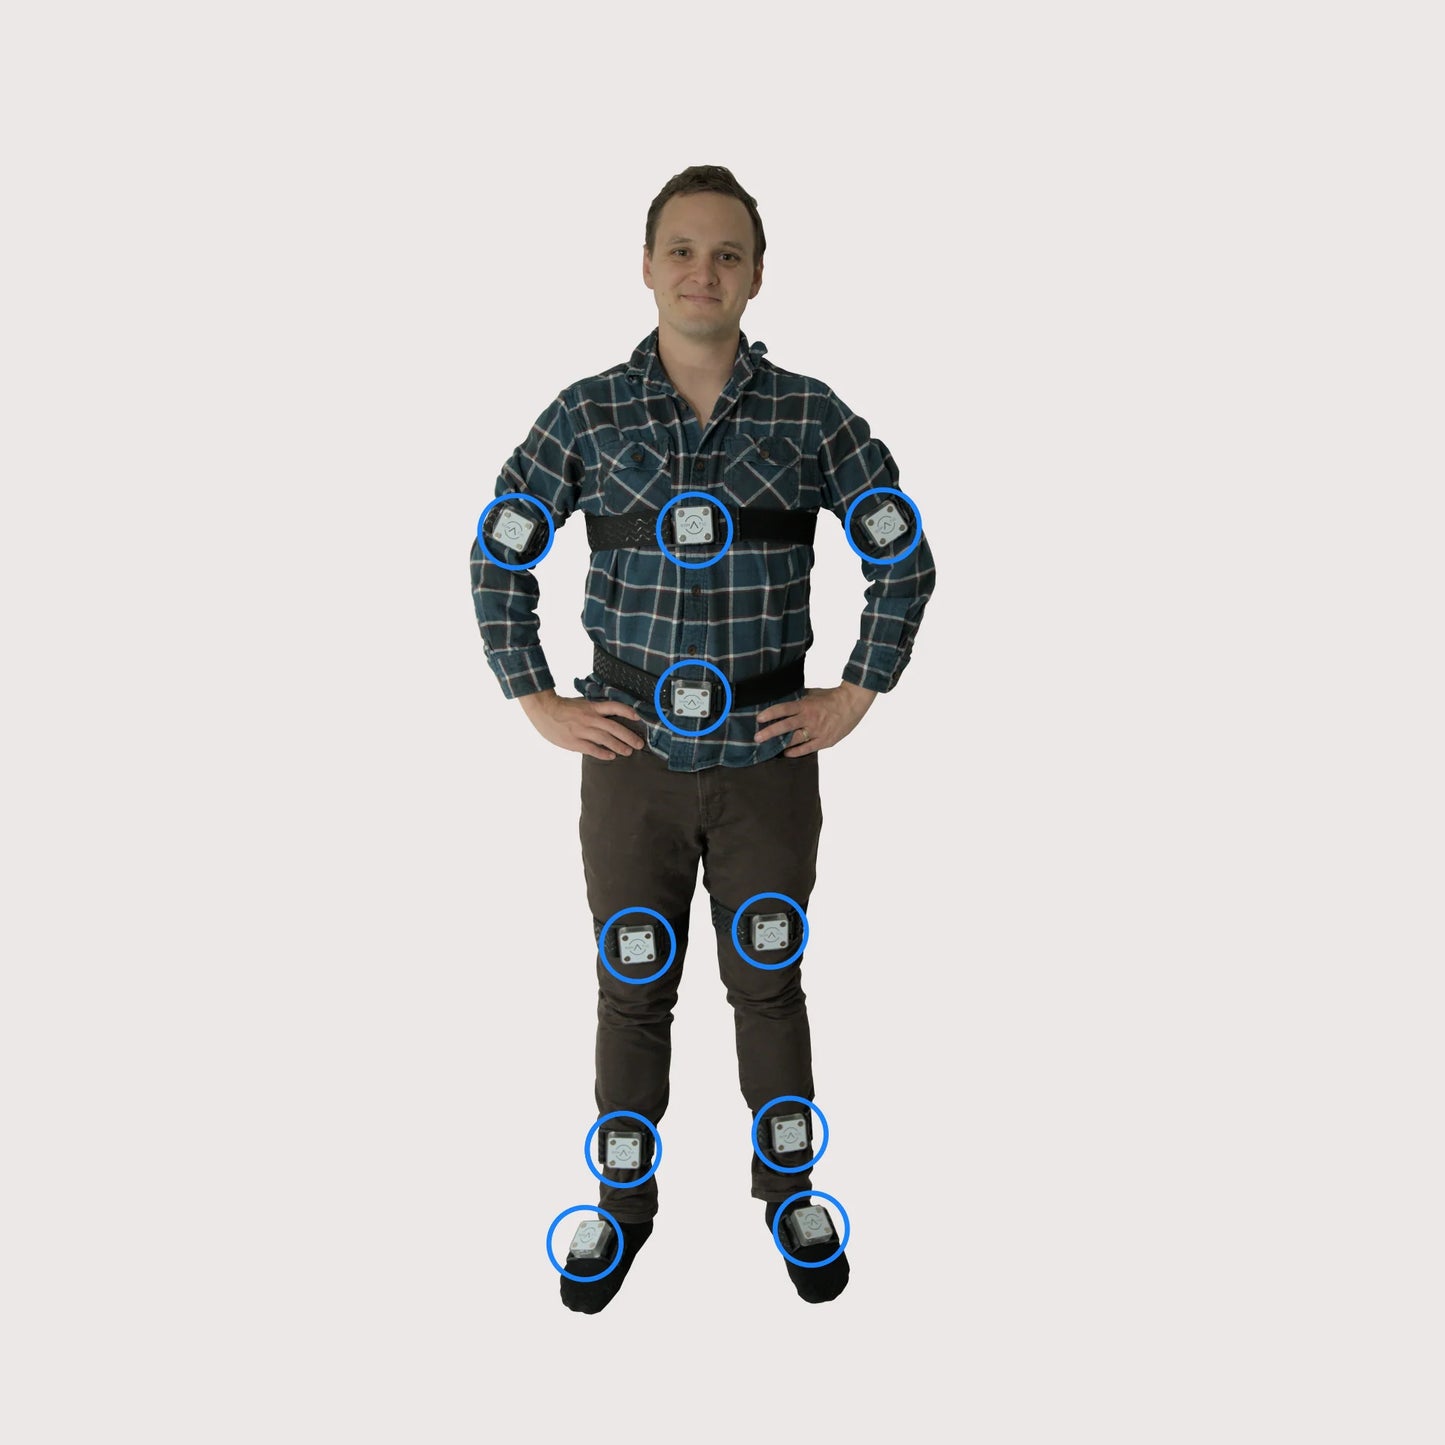 EROS Pro is a 10-point motion tracking system to render the highest quality full-body tracking available for Virtual Reality. These 10 devices can be placed on the arms, chest, waist, thighs, ankles, and feet for full body immersion.